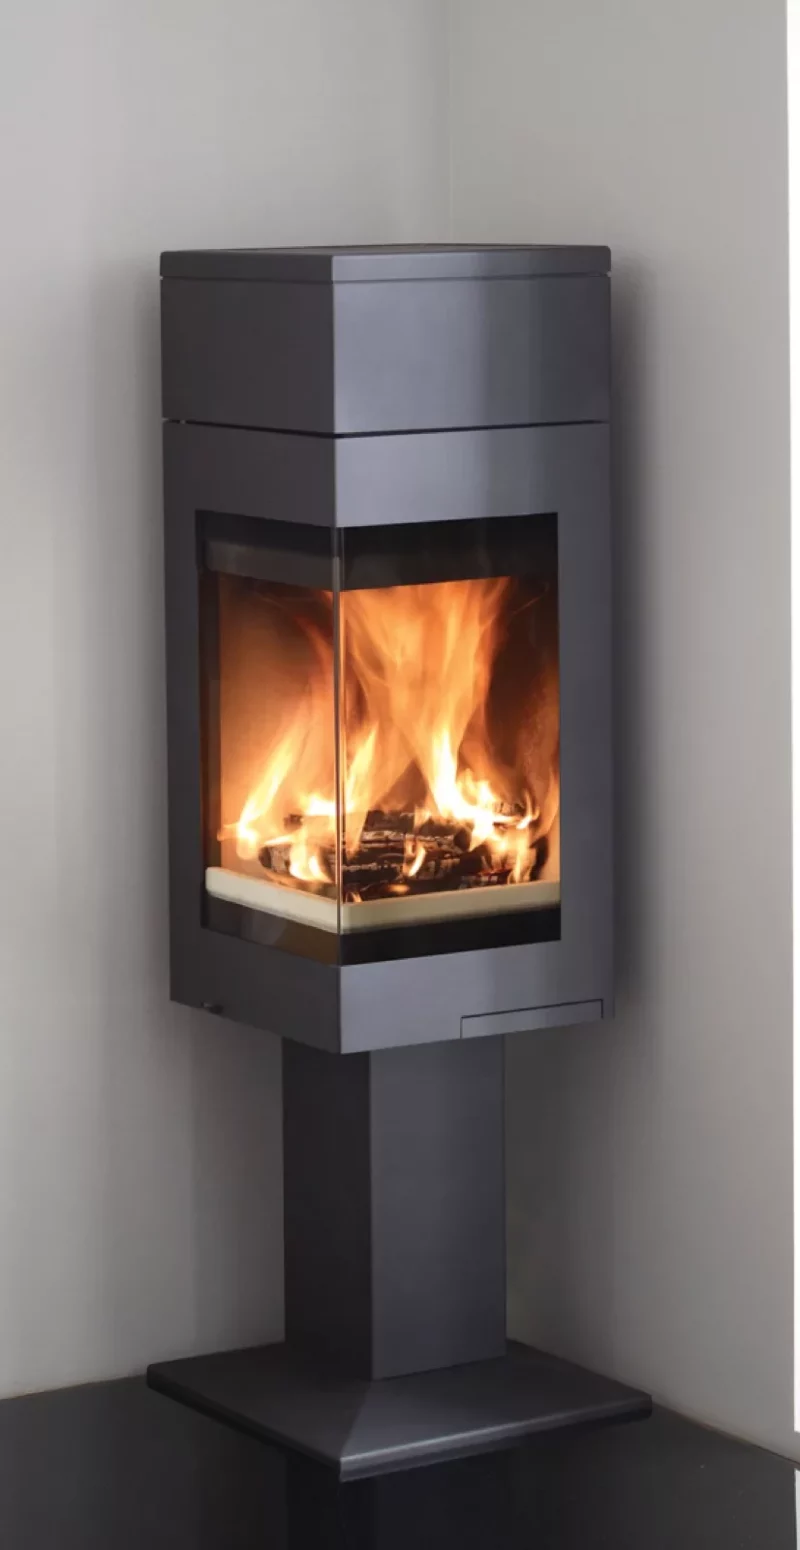 Nordpeis Quadro 1T Wood Burning Stove with Pedestal Base for corner installation